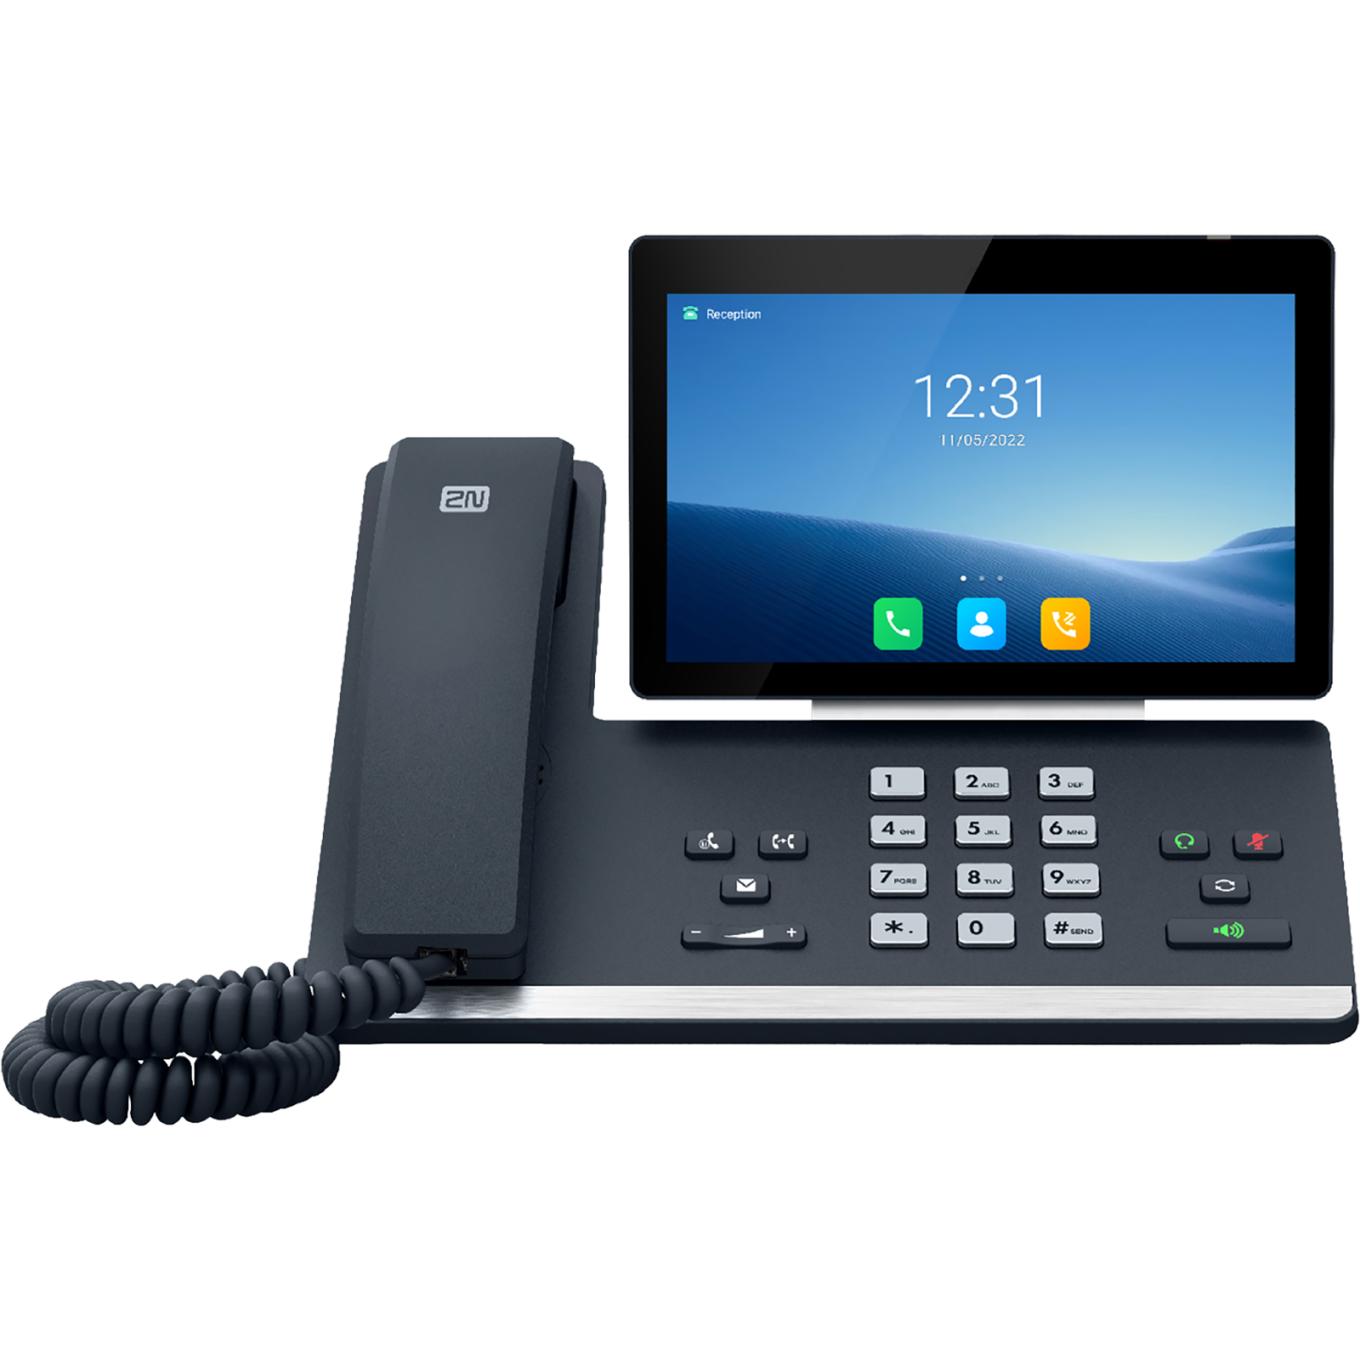 IP Telephone, viewed from its front